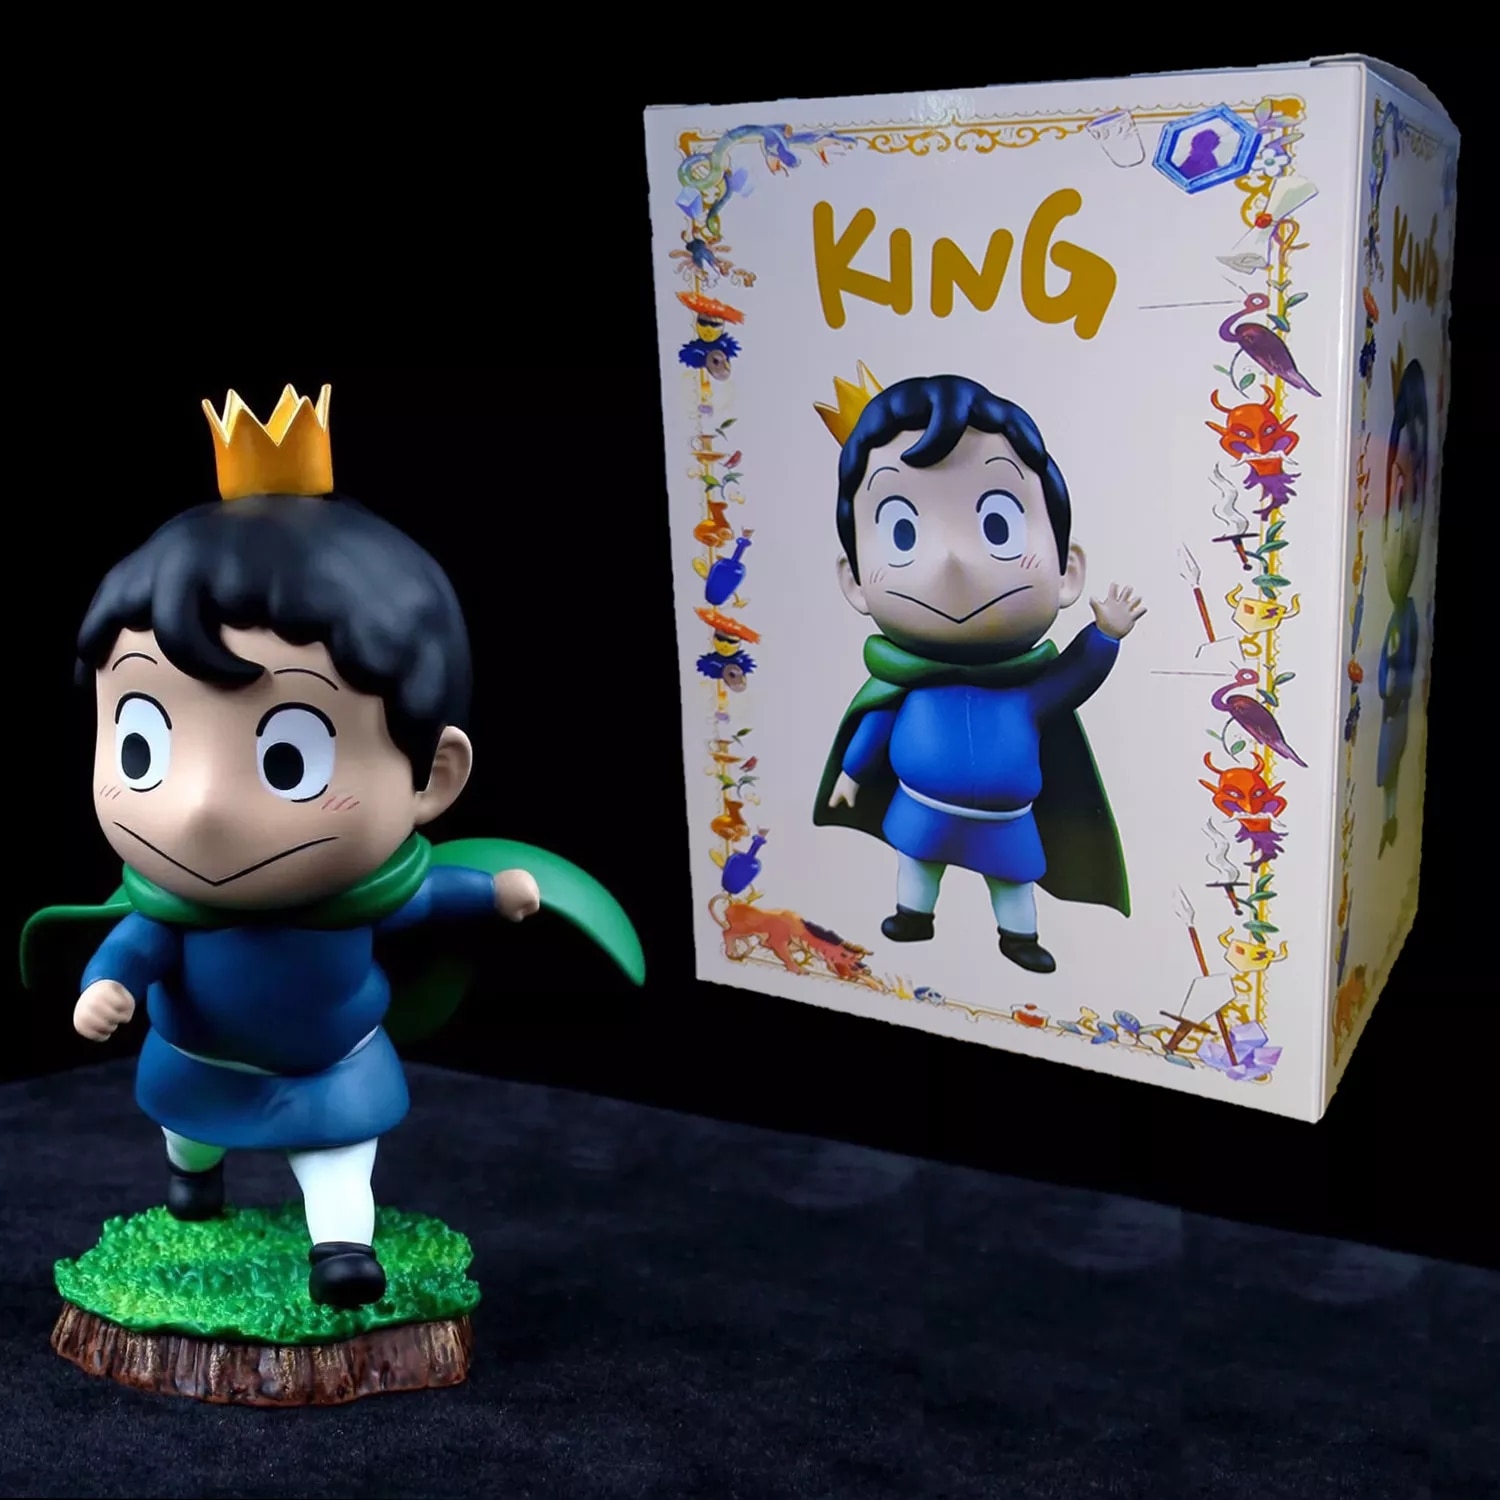 Ranking of Kings – Bojji Themed Stylish Action Figures (5 Designs) Action & Toy Figures